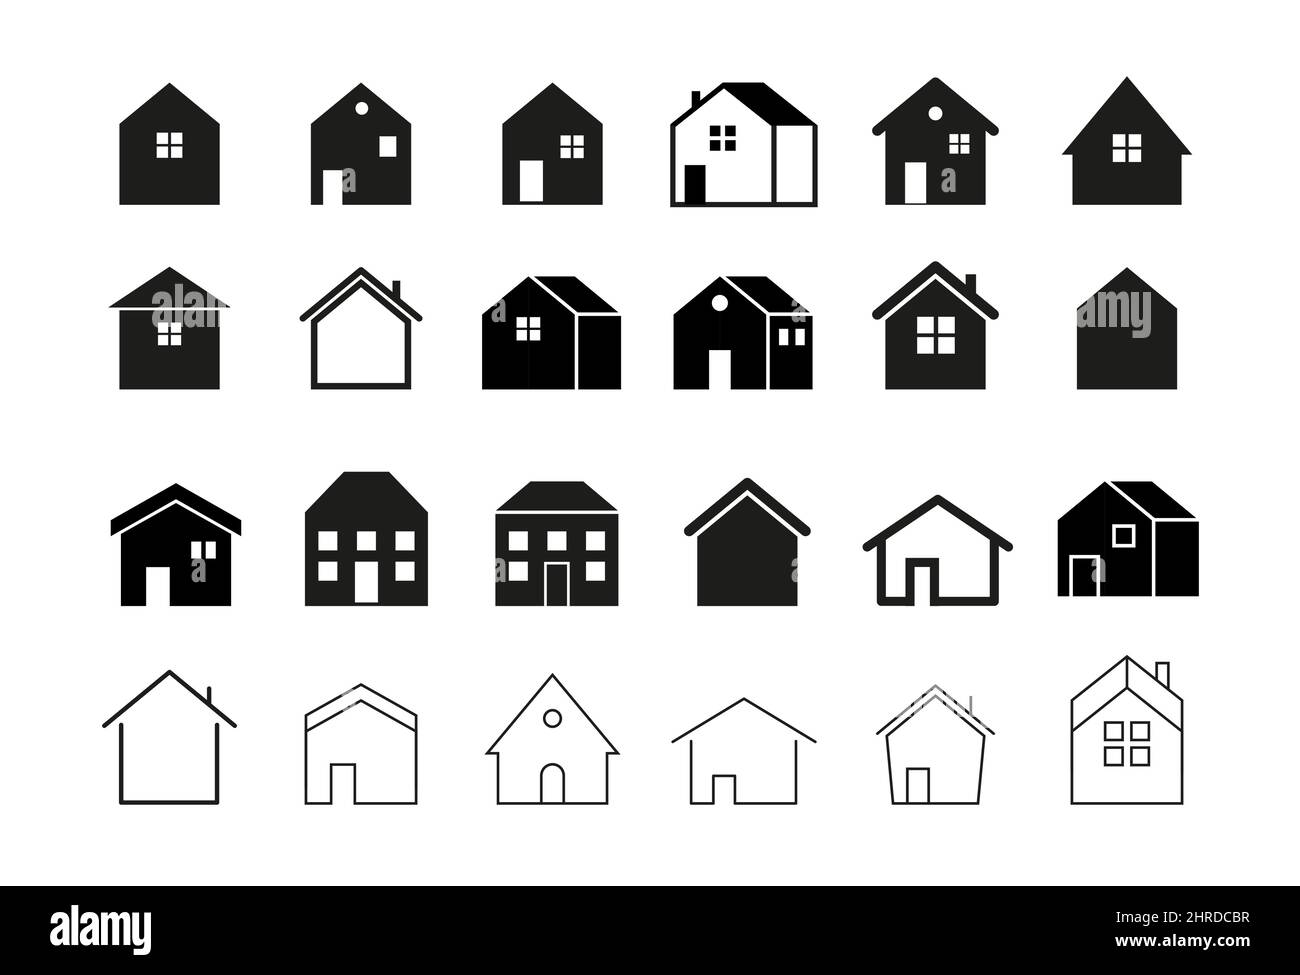 Home, houses and buildings icons, symbols and logos Stock Vector